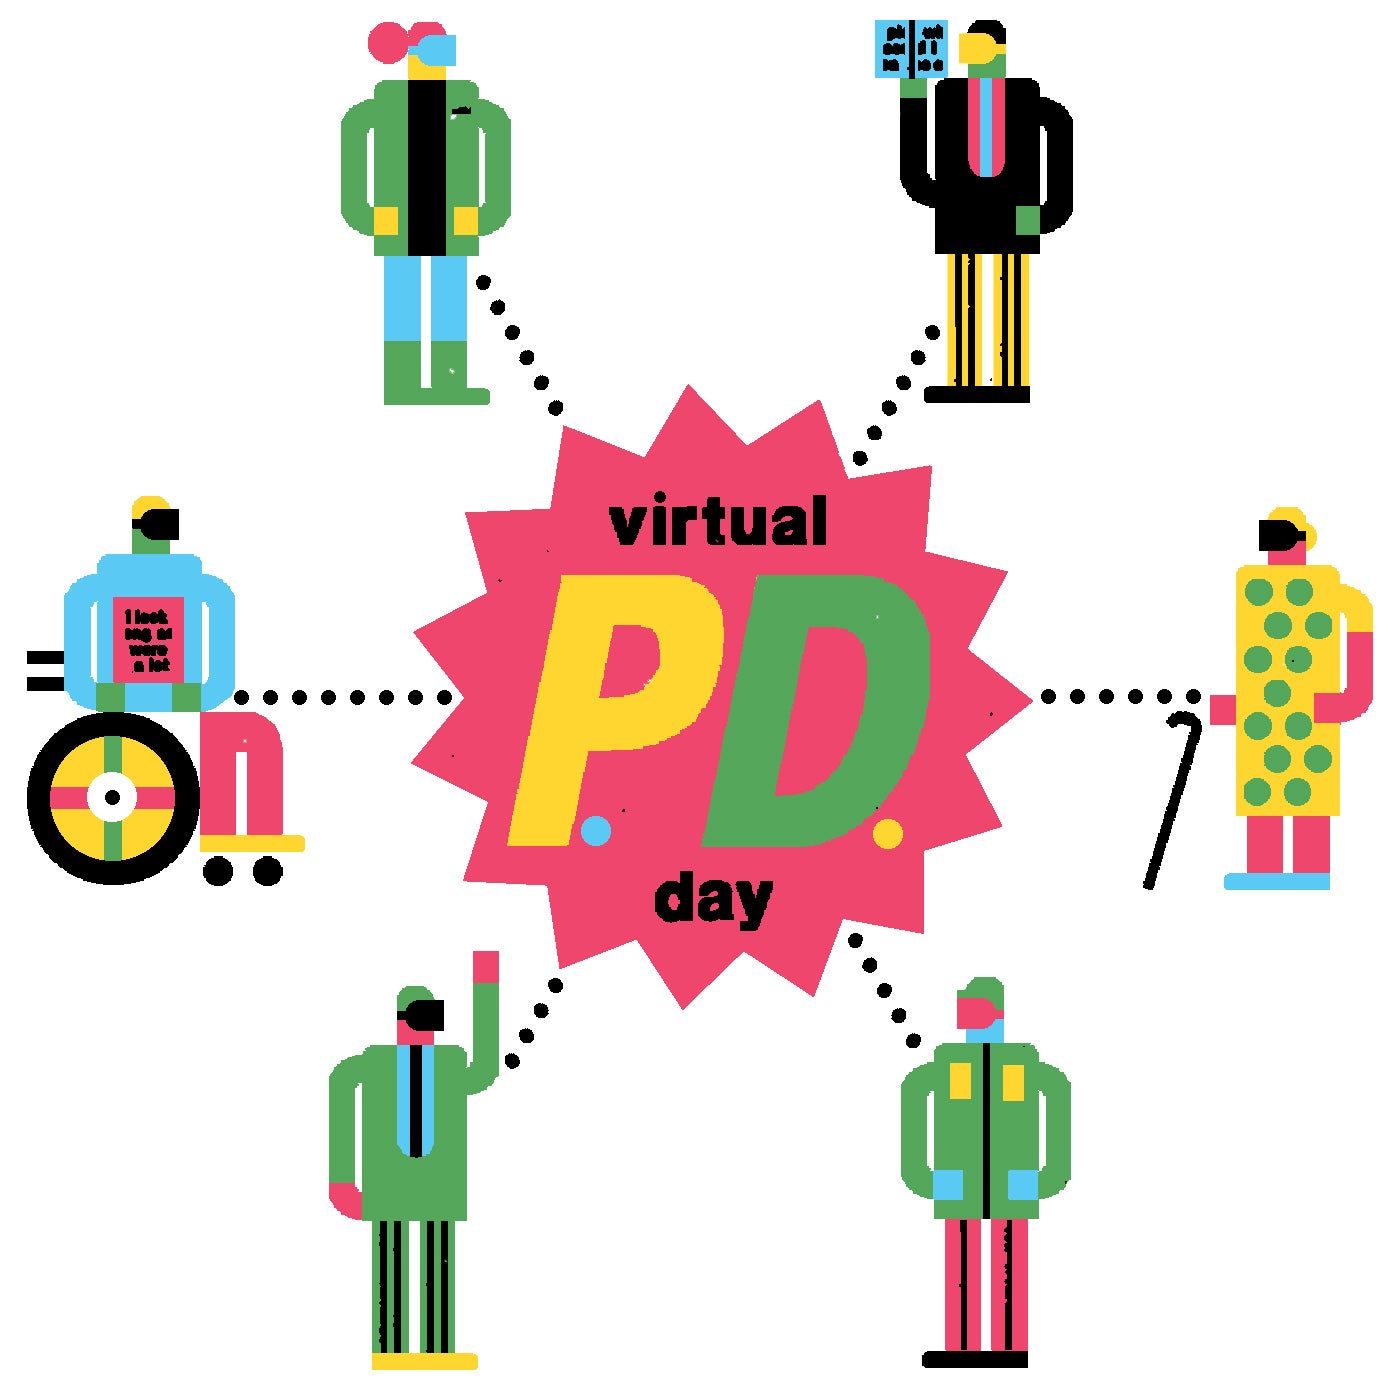 Virtual PD Day with network of VR goggle-wearing teachers.